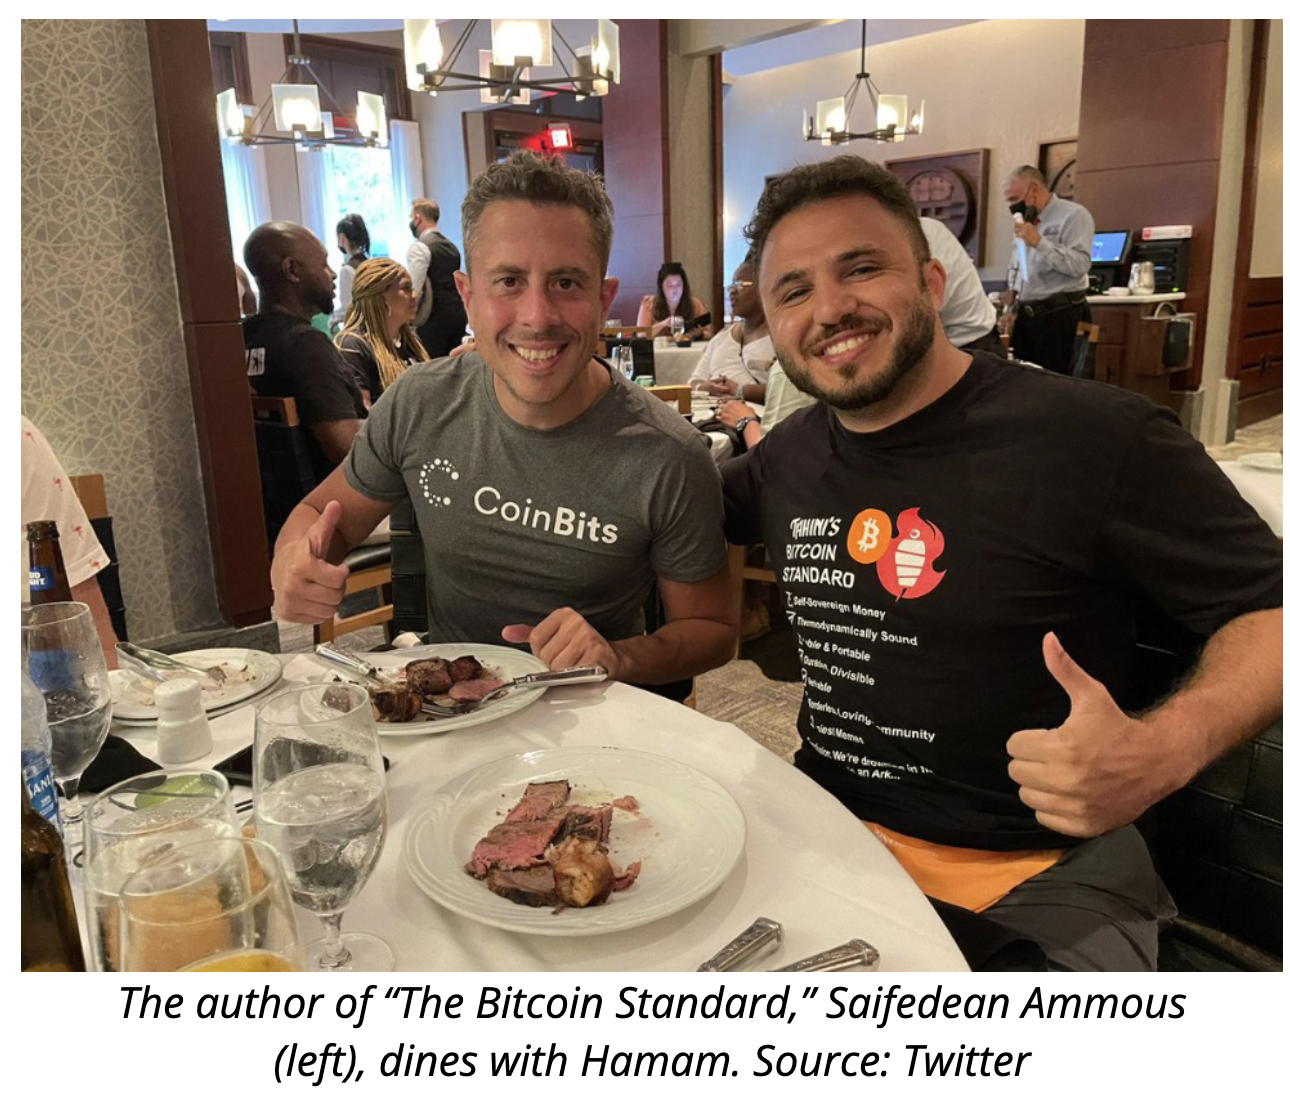 Entrepreneurs Learn To Operate Their Business On The Bitcoin Standard